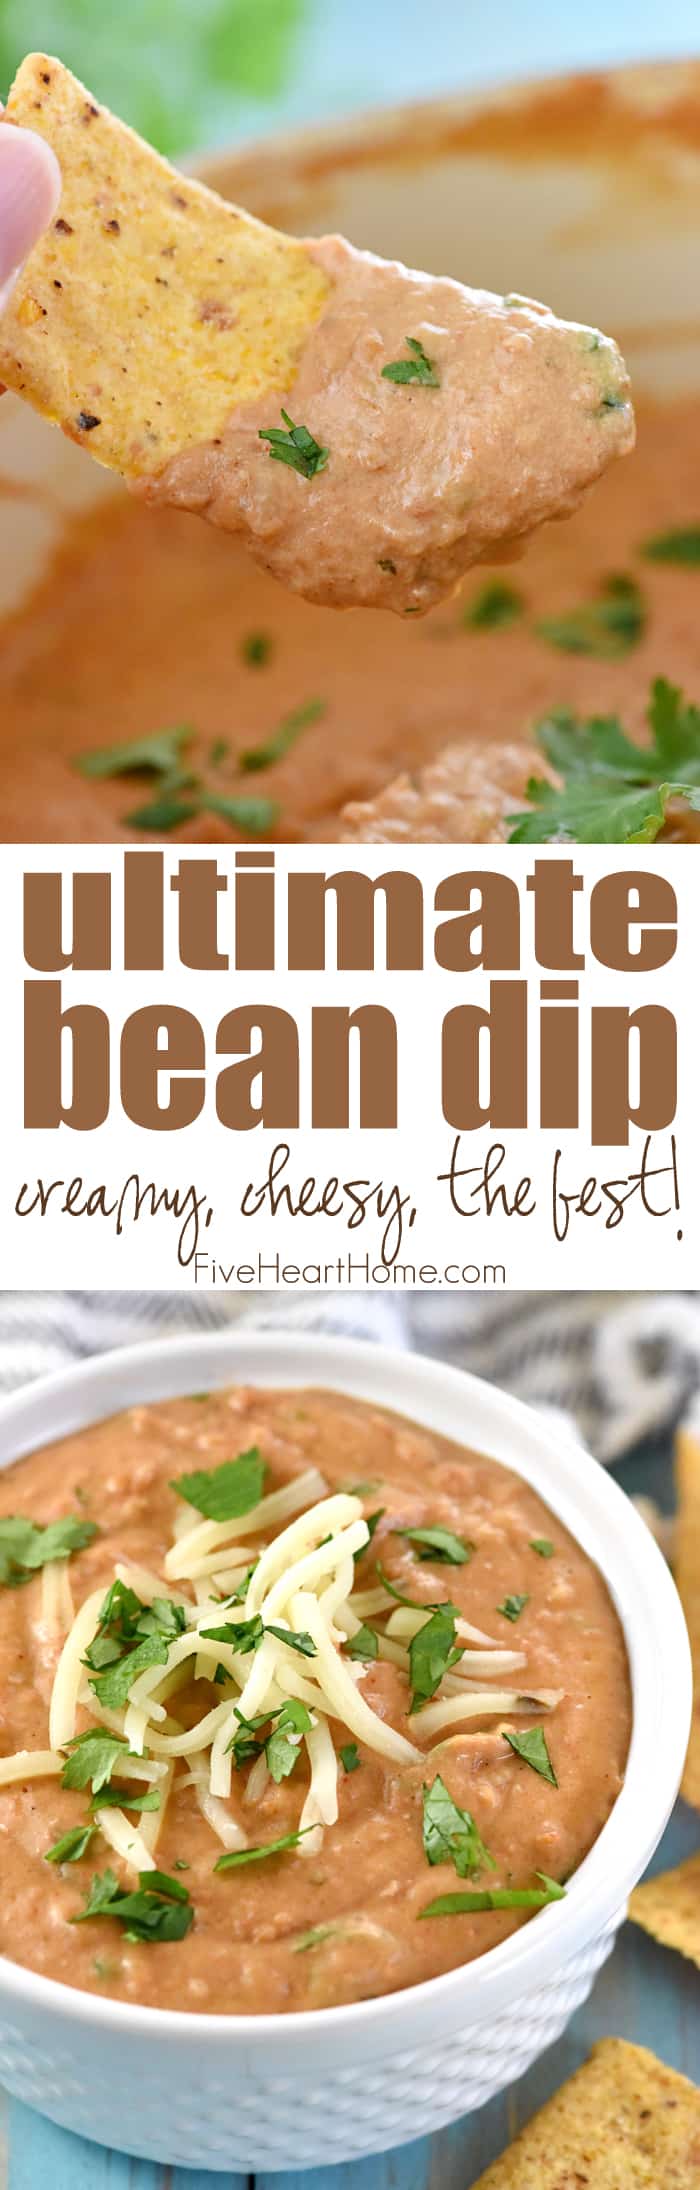 Ultimate Bean Dip ~ with just SIX simple ingredients -- refried beans, cream cheese, salsa, pepper jack, and cilantro -- and requiring just 10 minutes to make, this stove-top appetizer recipe is creamy and cheesy...the perfect bean dip recipe for parties or for watching the big game! | FiveHeartHome.com via @fivehearthome